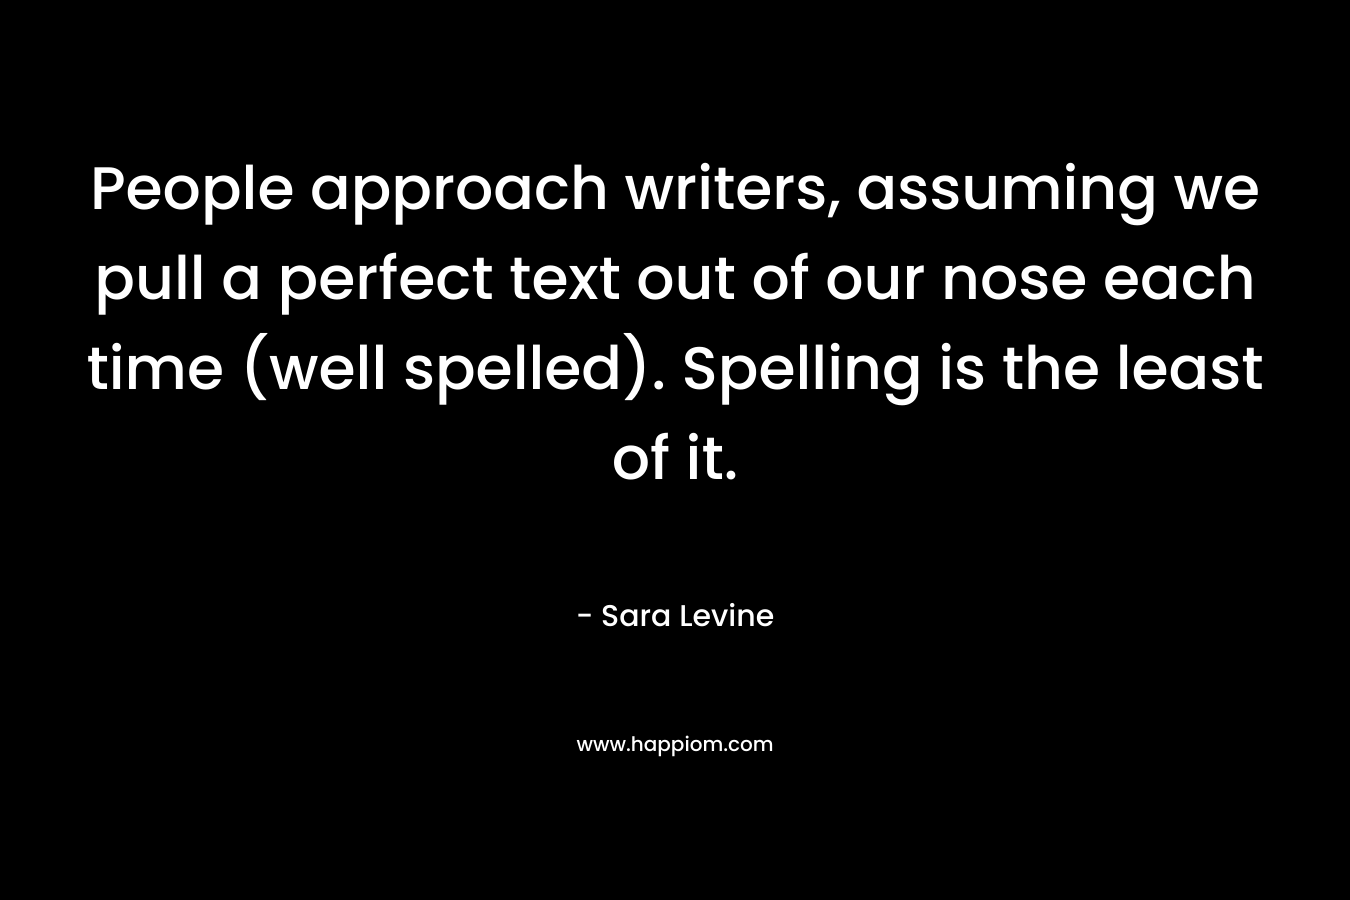 People approach writers, assuming we pull a perfect text out of our nose each time (well spelled). Spelling is the least of it. – Sara Levine